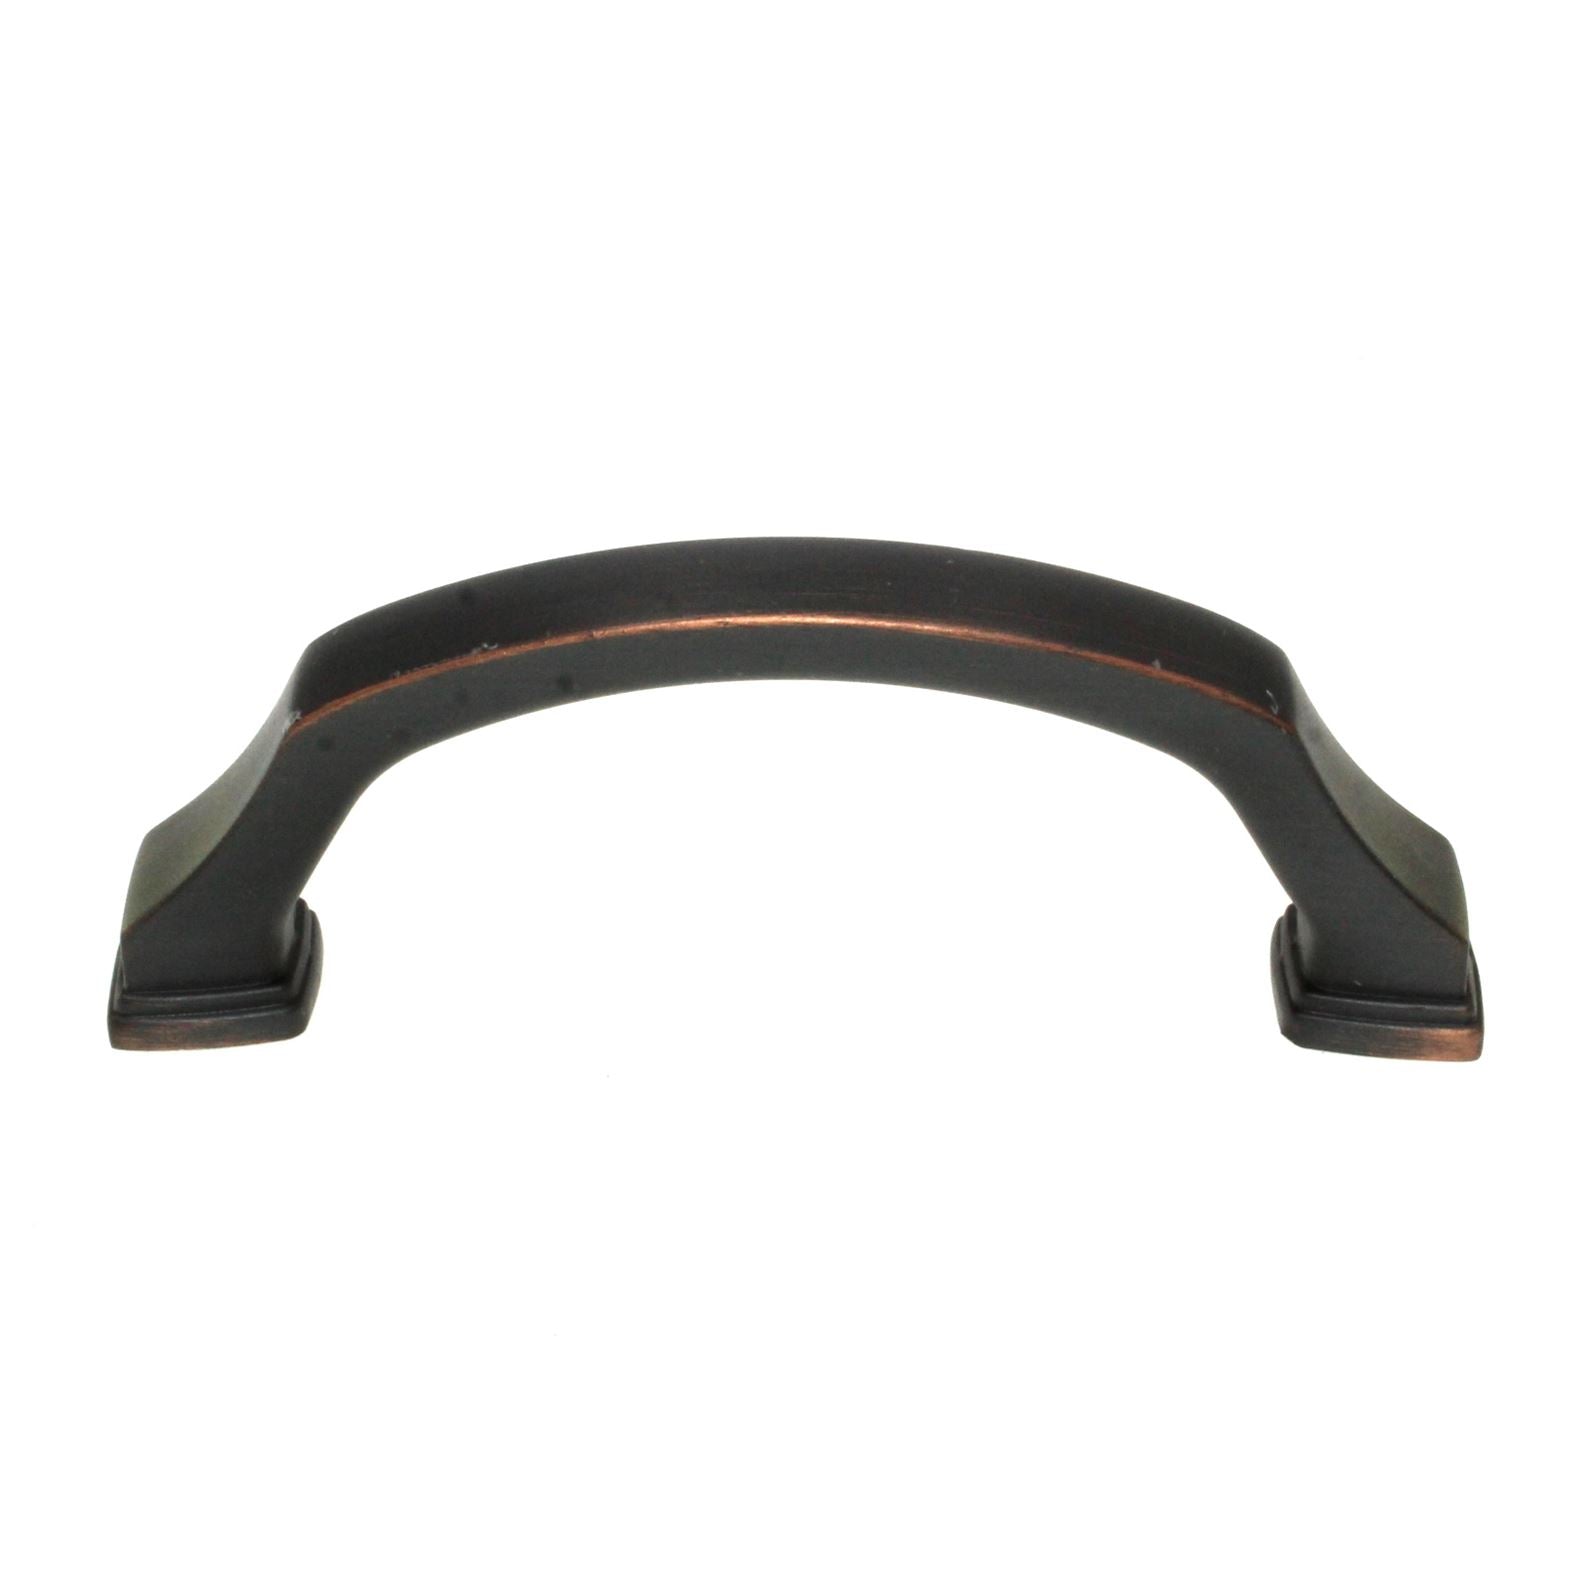 Amerock Revitalize Oil-Rubbed Bronze 3" Ctr. Cabinet Pull Handle BP55343ORB